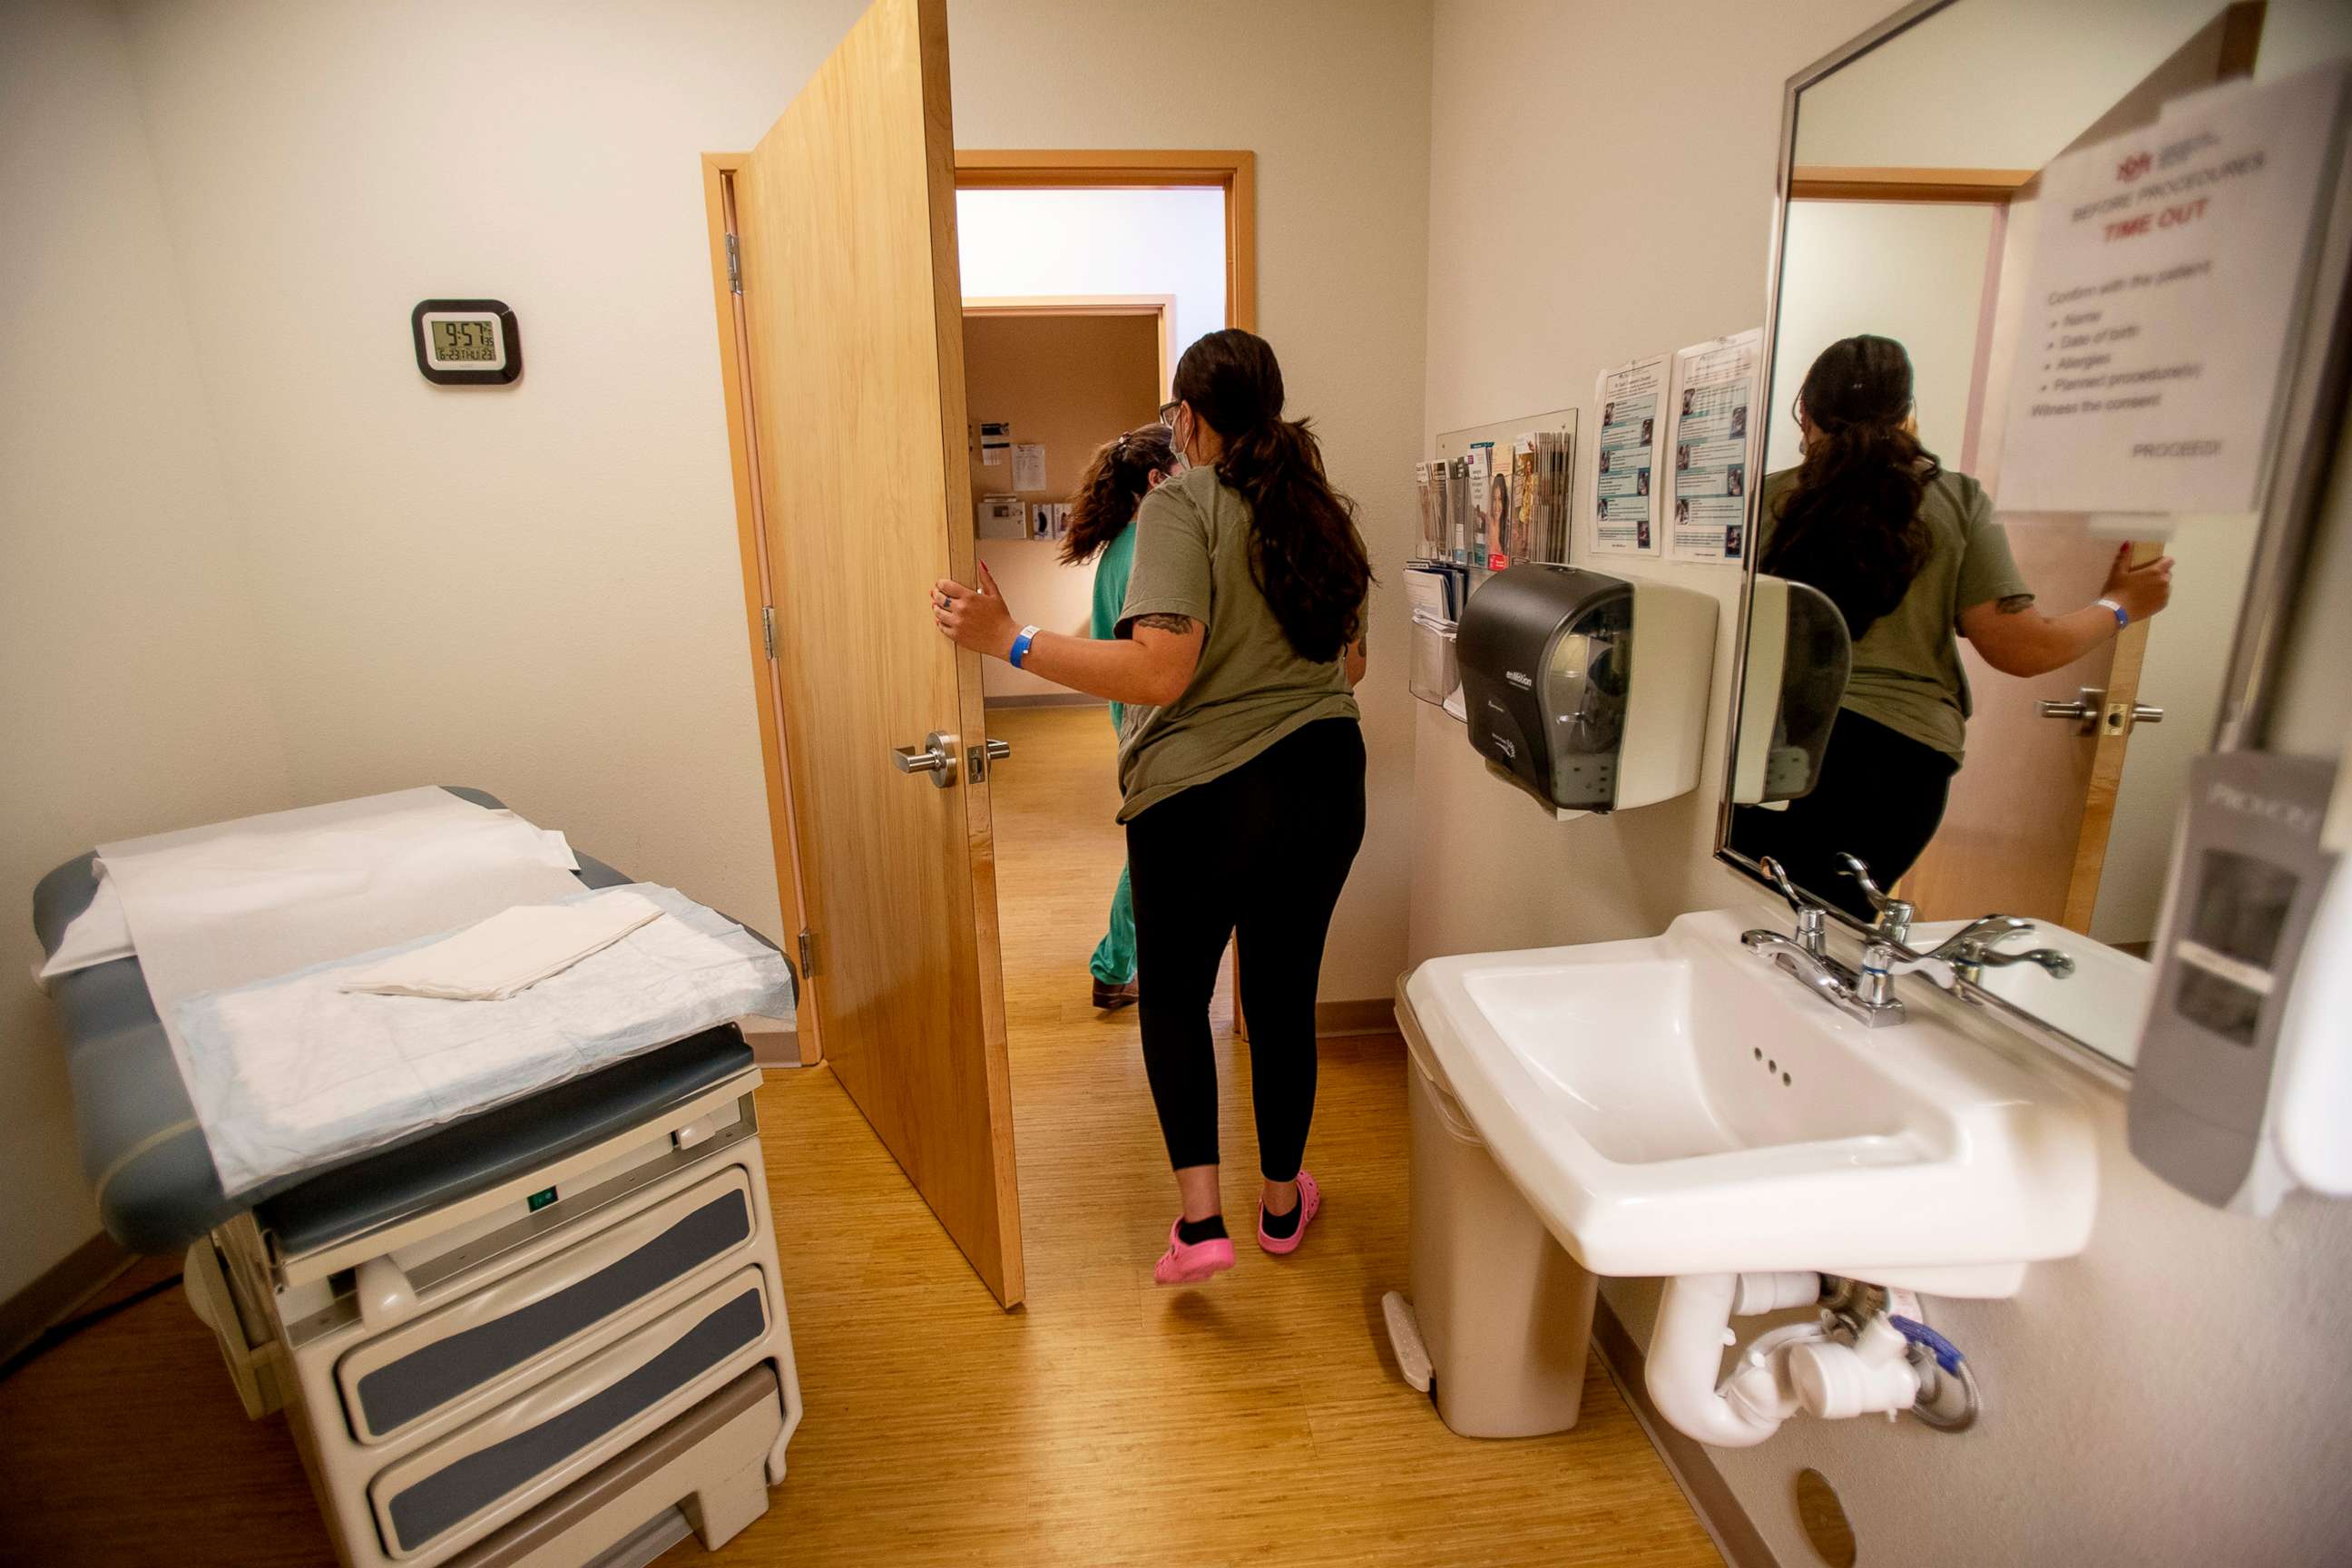 PHOTO: A 25-year-old woman leaves the exam room after receiving medication to terminate her pregnancy in Albuquerque, N.M., June 23, 2022.